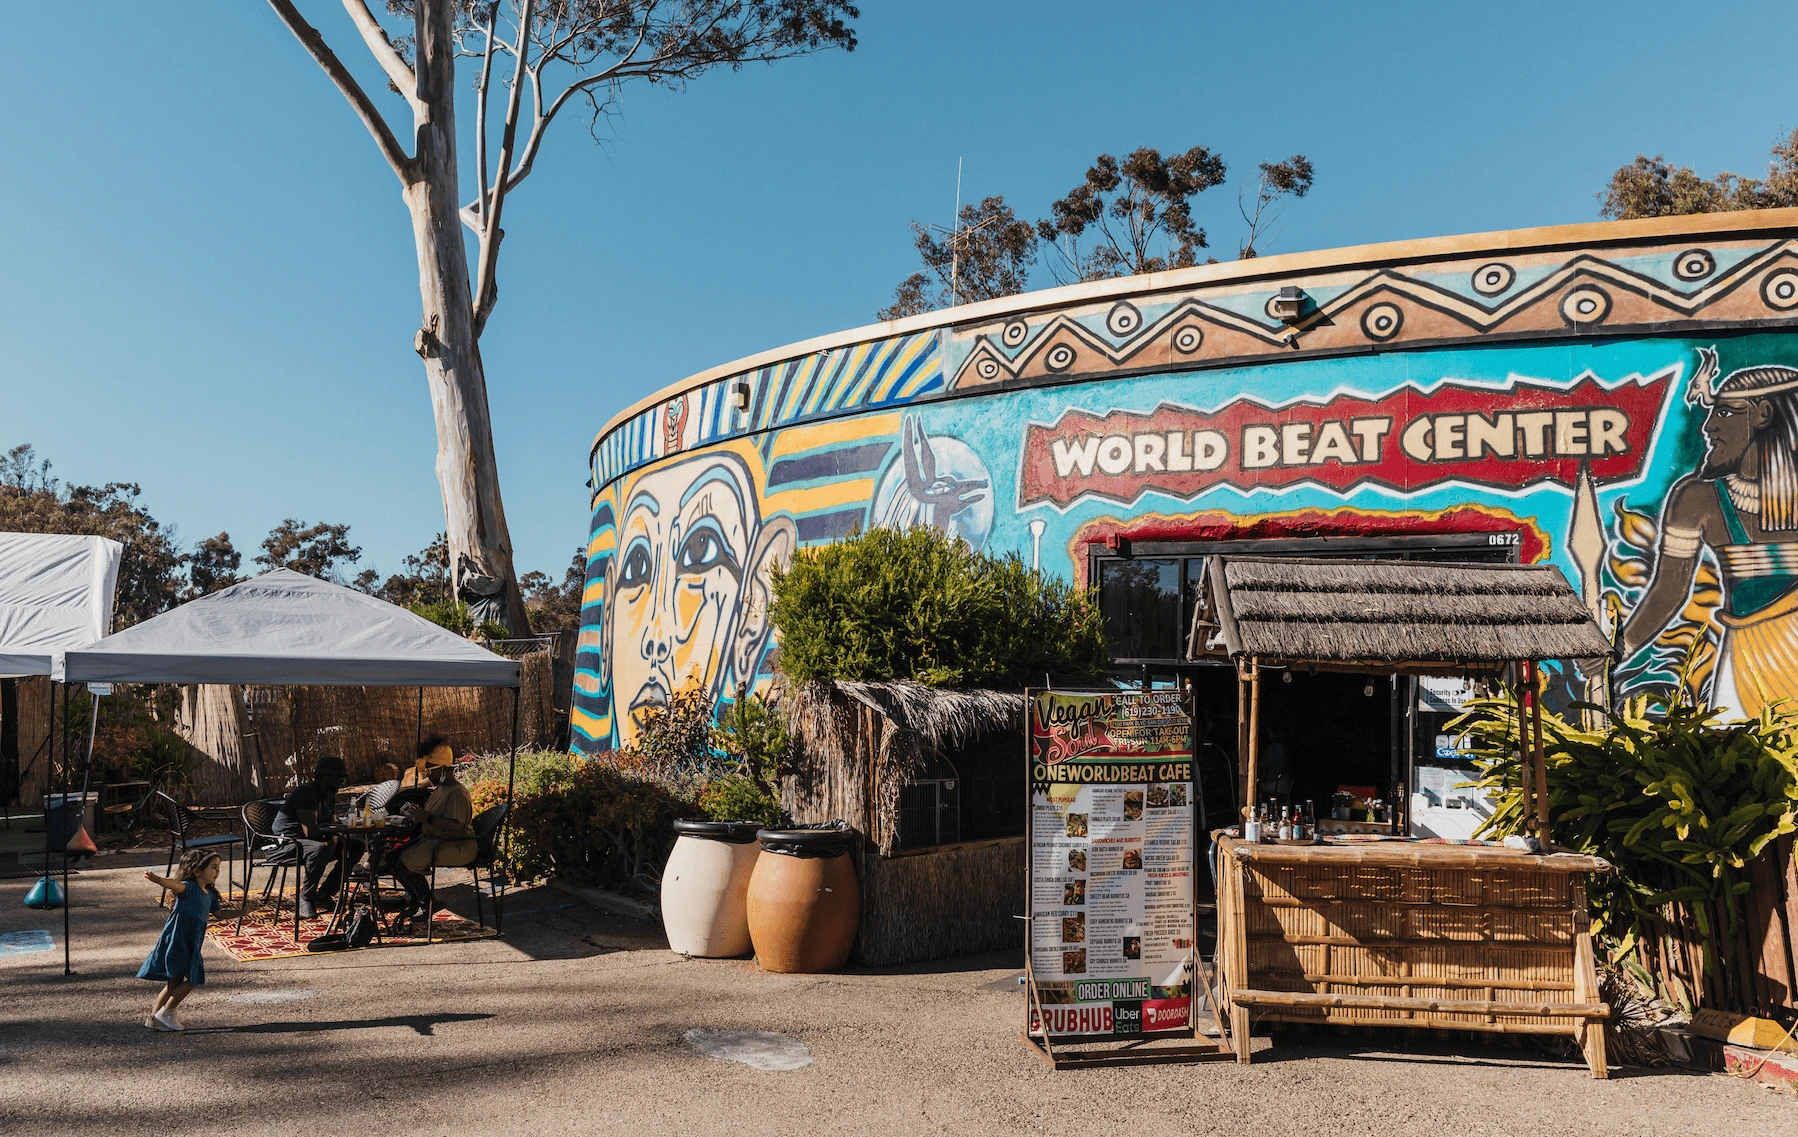 The entrance to the World Beat Center. The building is covered in bright and colorful murals.